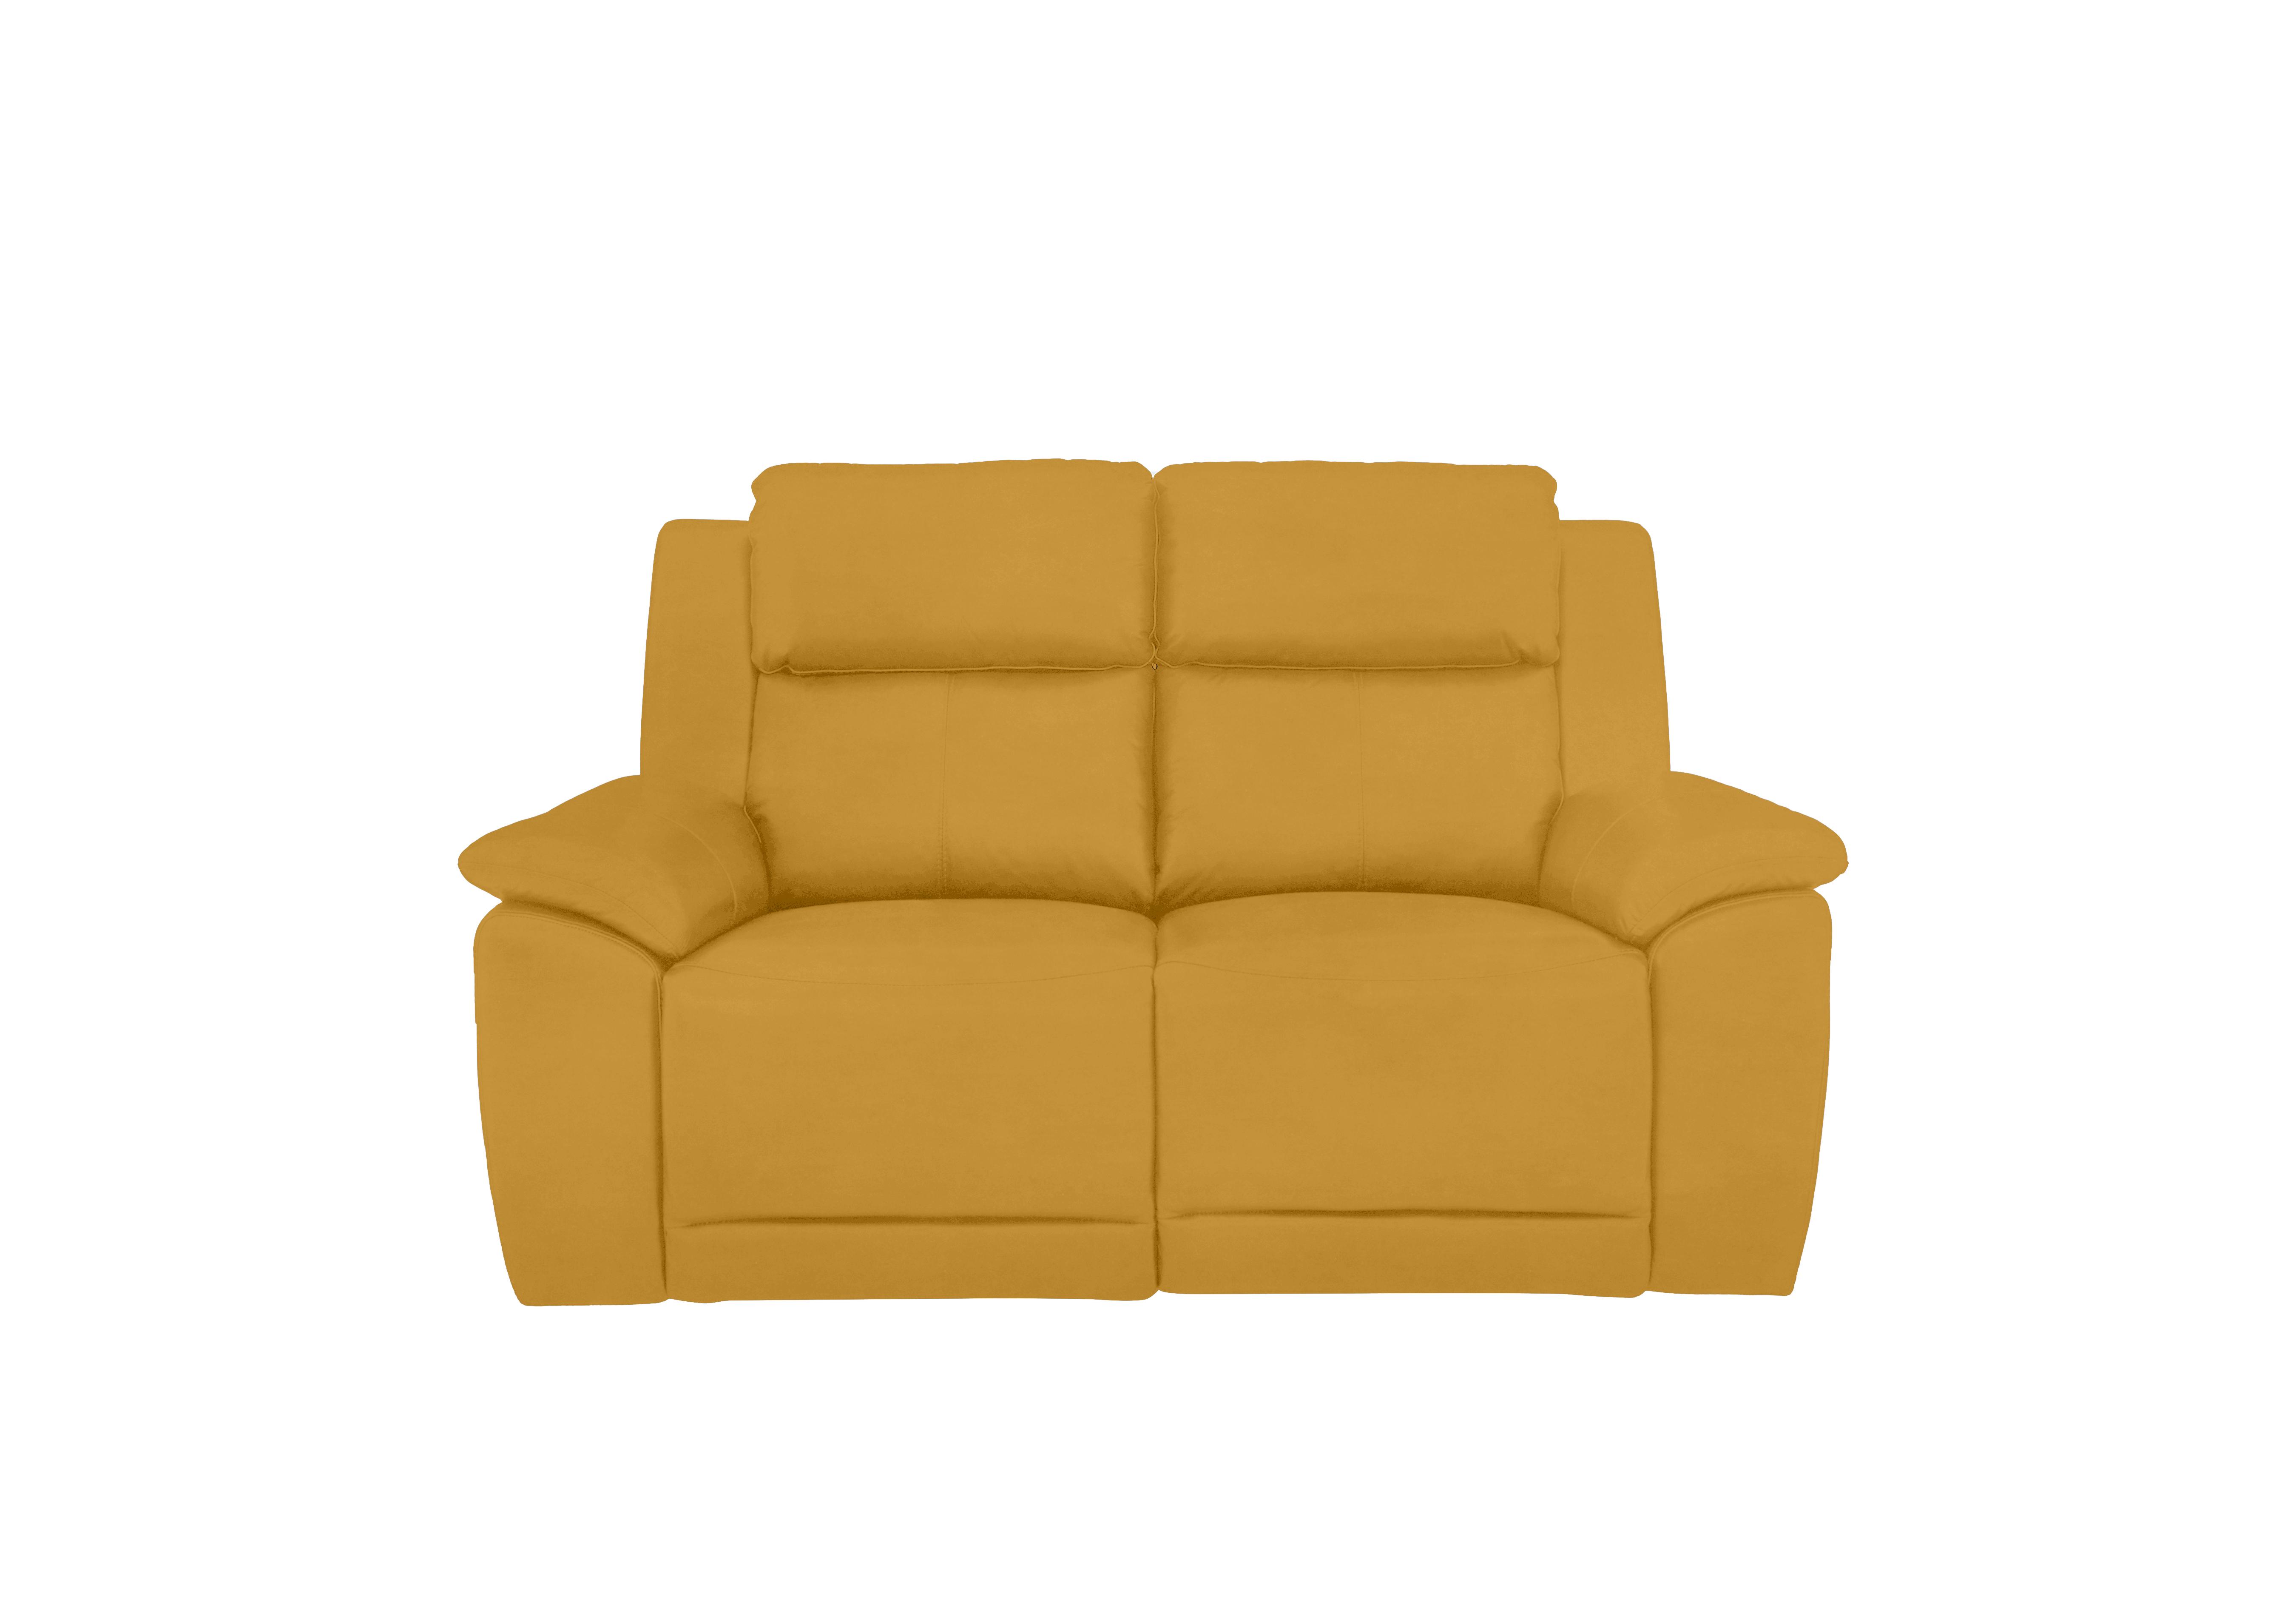 Utah 2 Seater Fabric Power Recliner Sofa with Power Headrests and Power Lumbar in Velvet Giallo Vv-0310 on Furniture Village